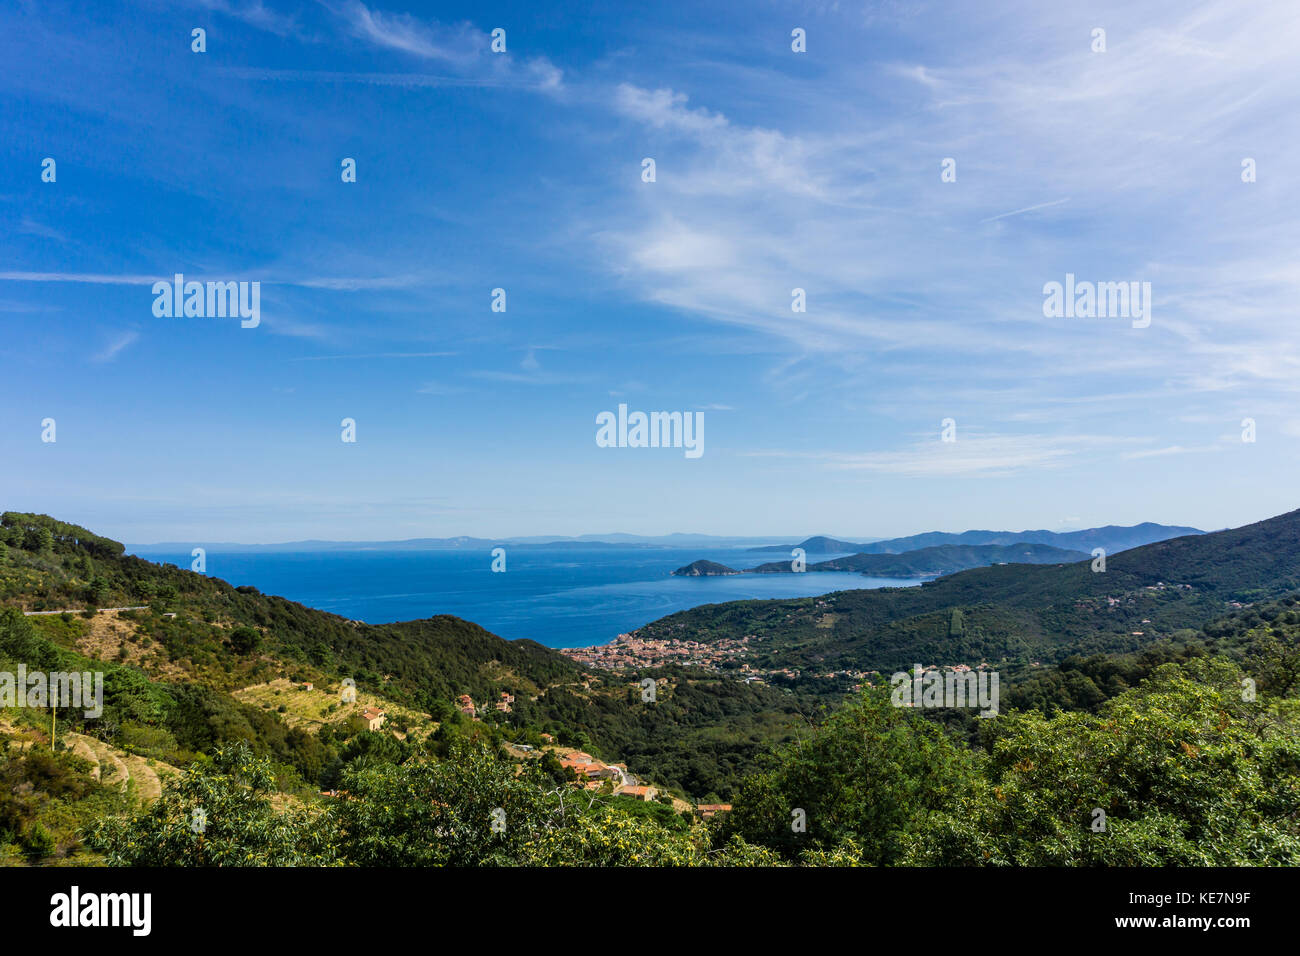 Horizontal view down on small town Marciana Marina on the coast of Elba island in Mediterranean sea. The hills and mountains around are covered by tre Stock Photo